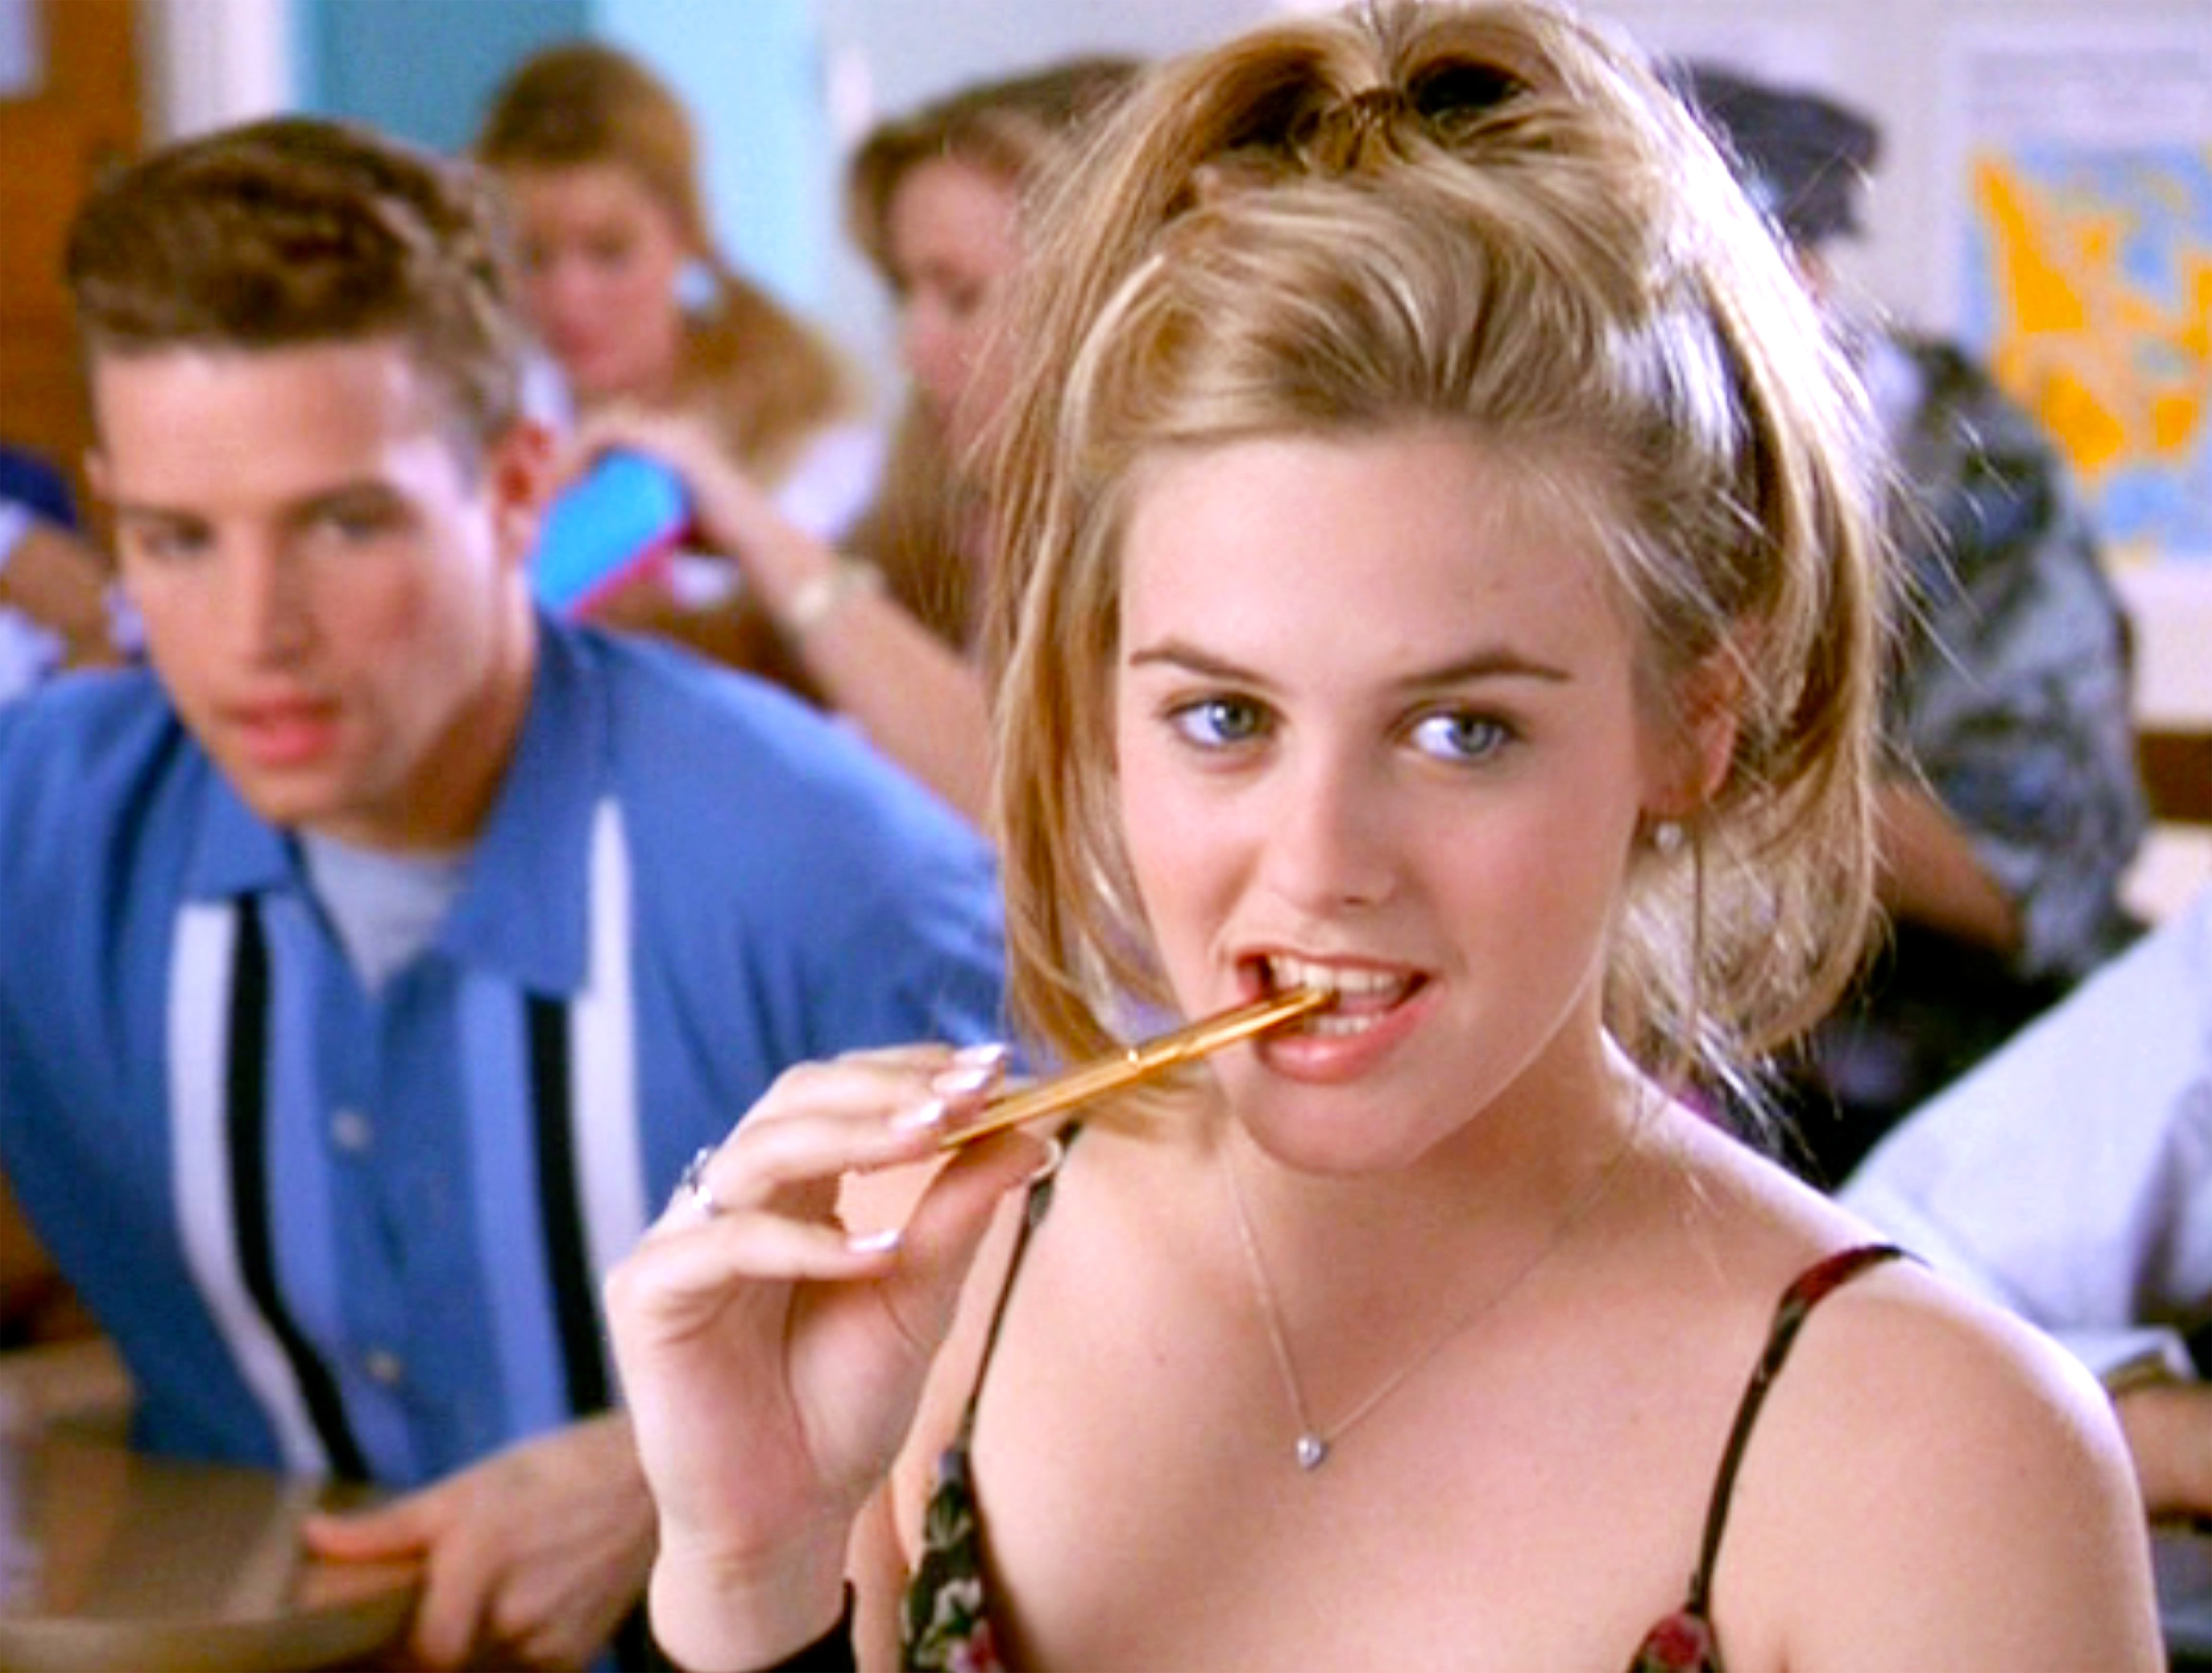 Alicia became the breakout star of her 1995 movie Clueless